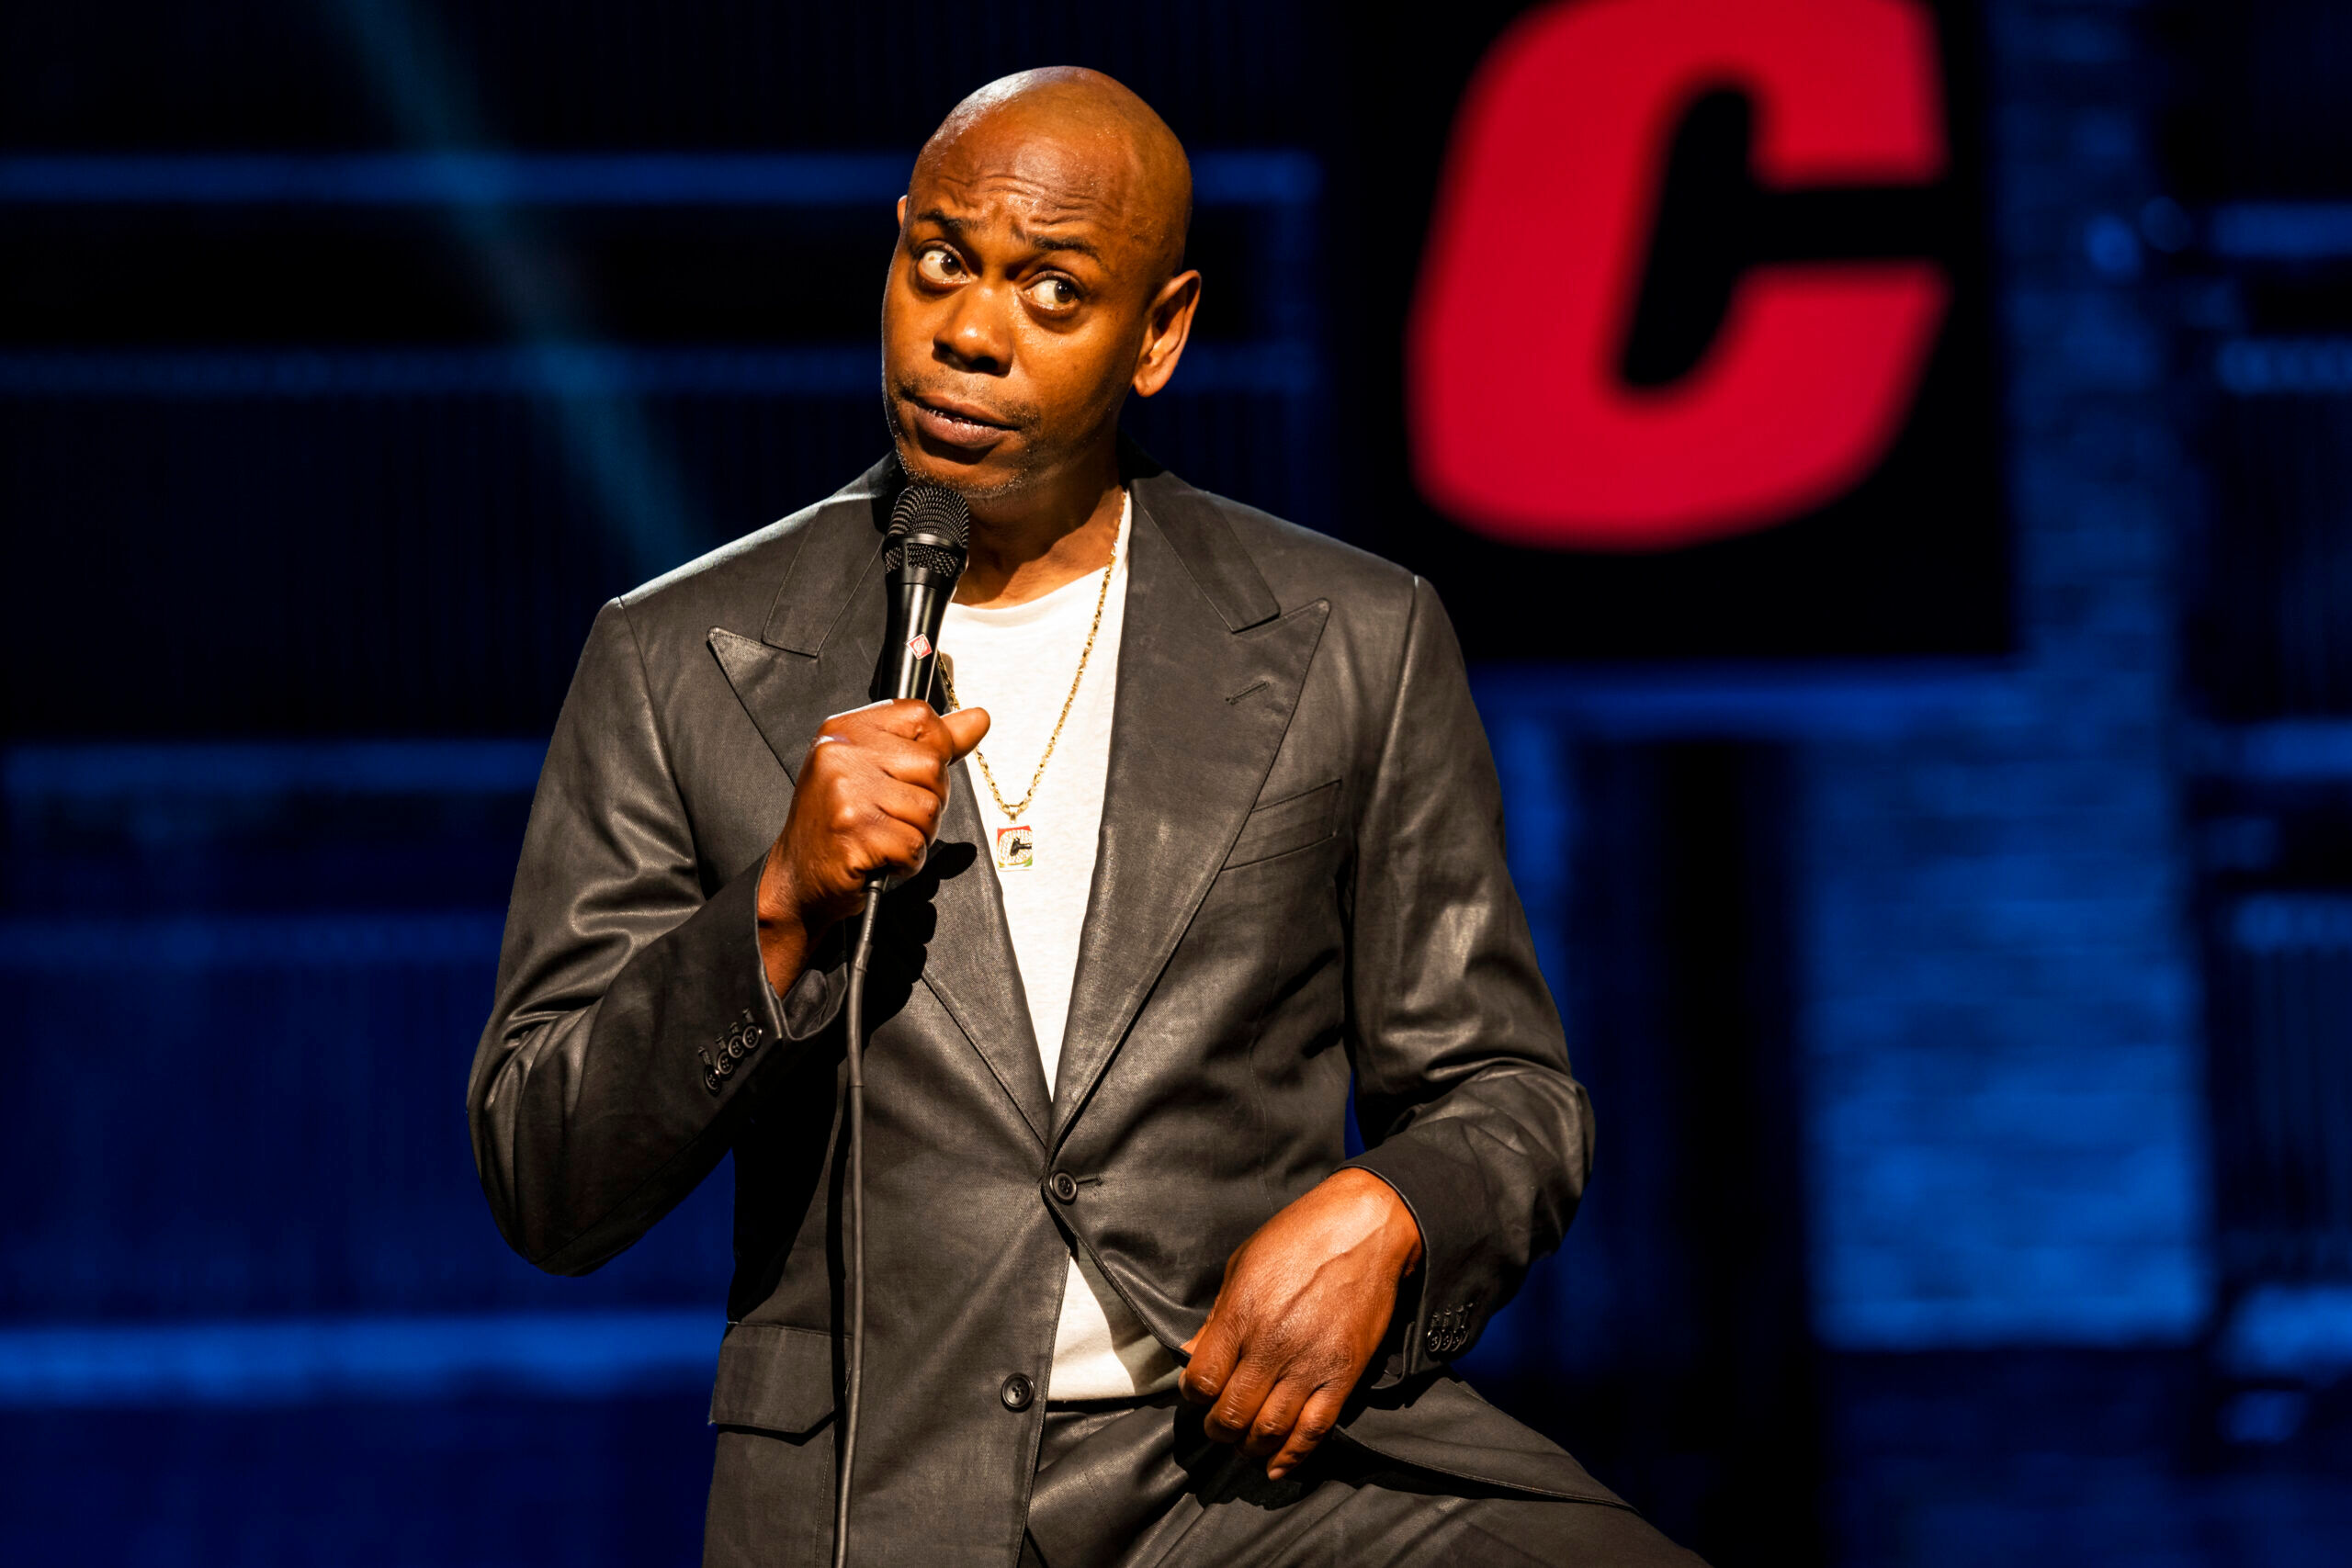 Dave Chappelle in his 2021 Netflix special The Closer